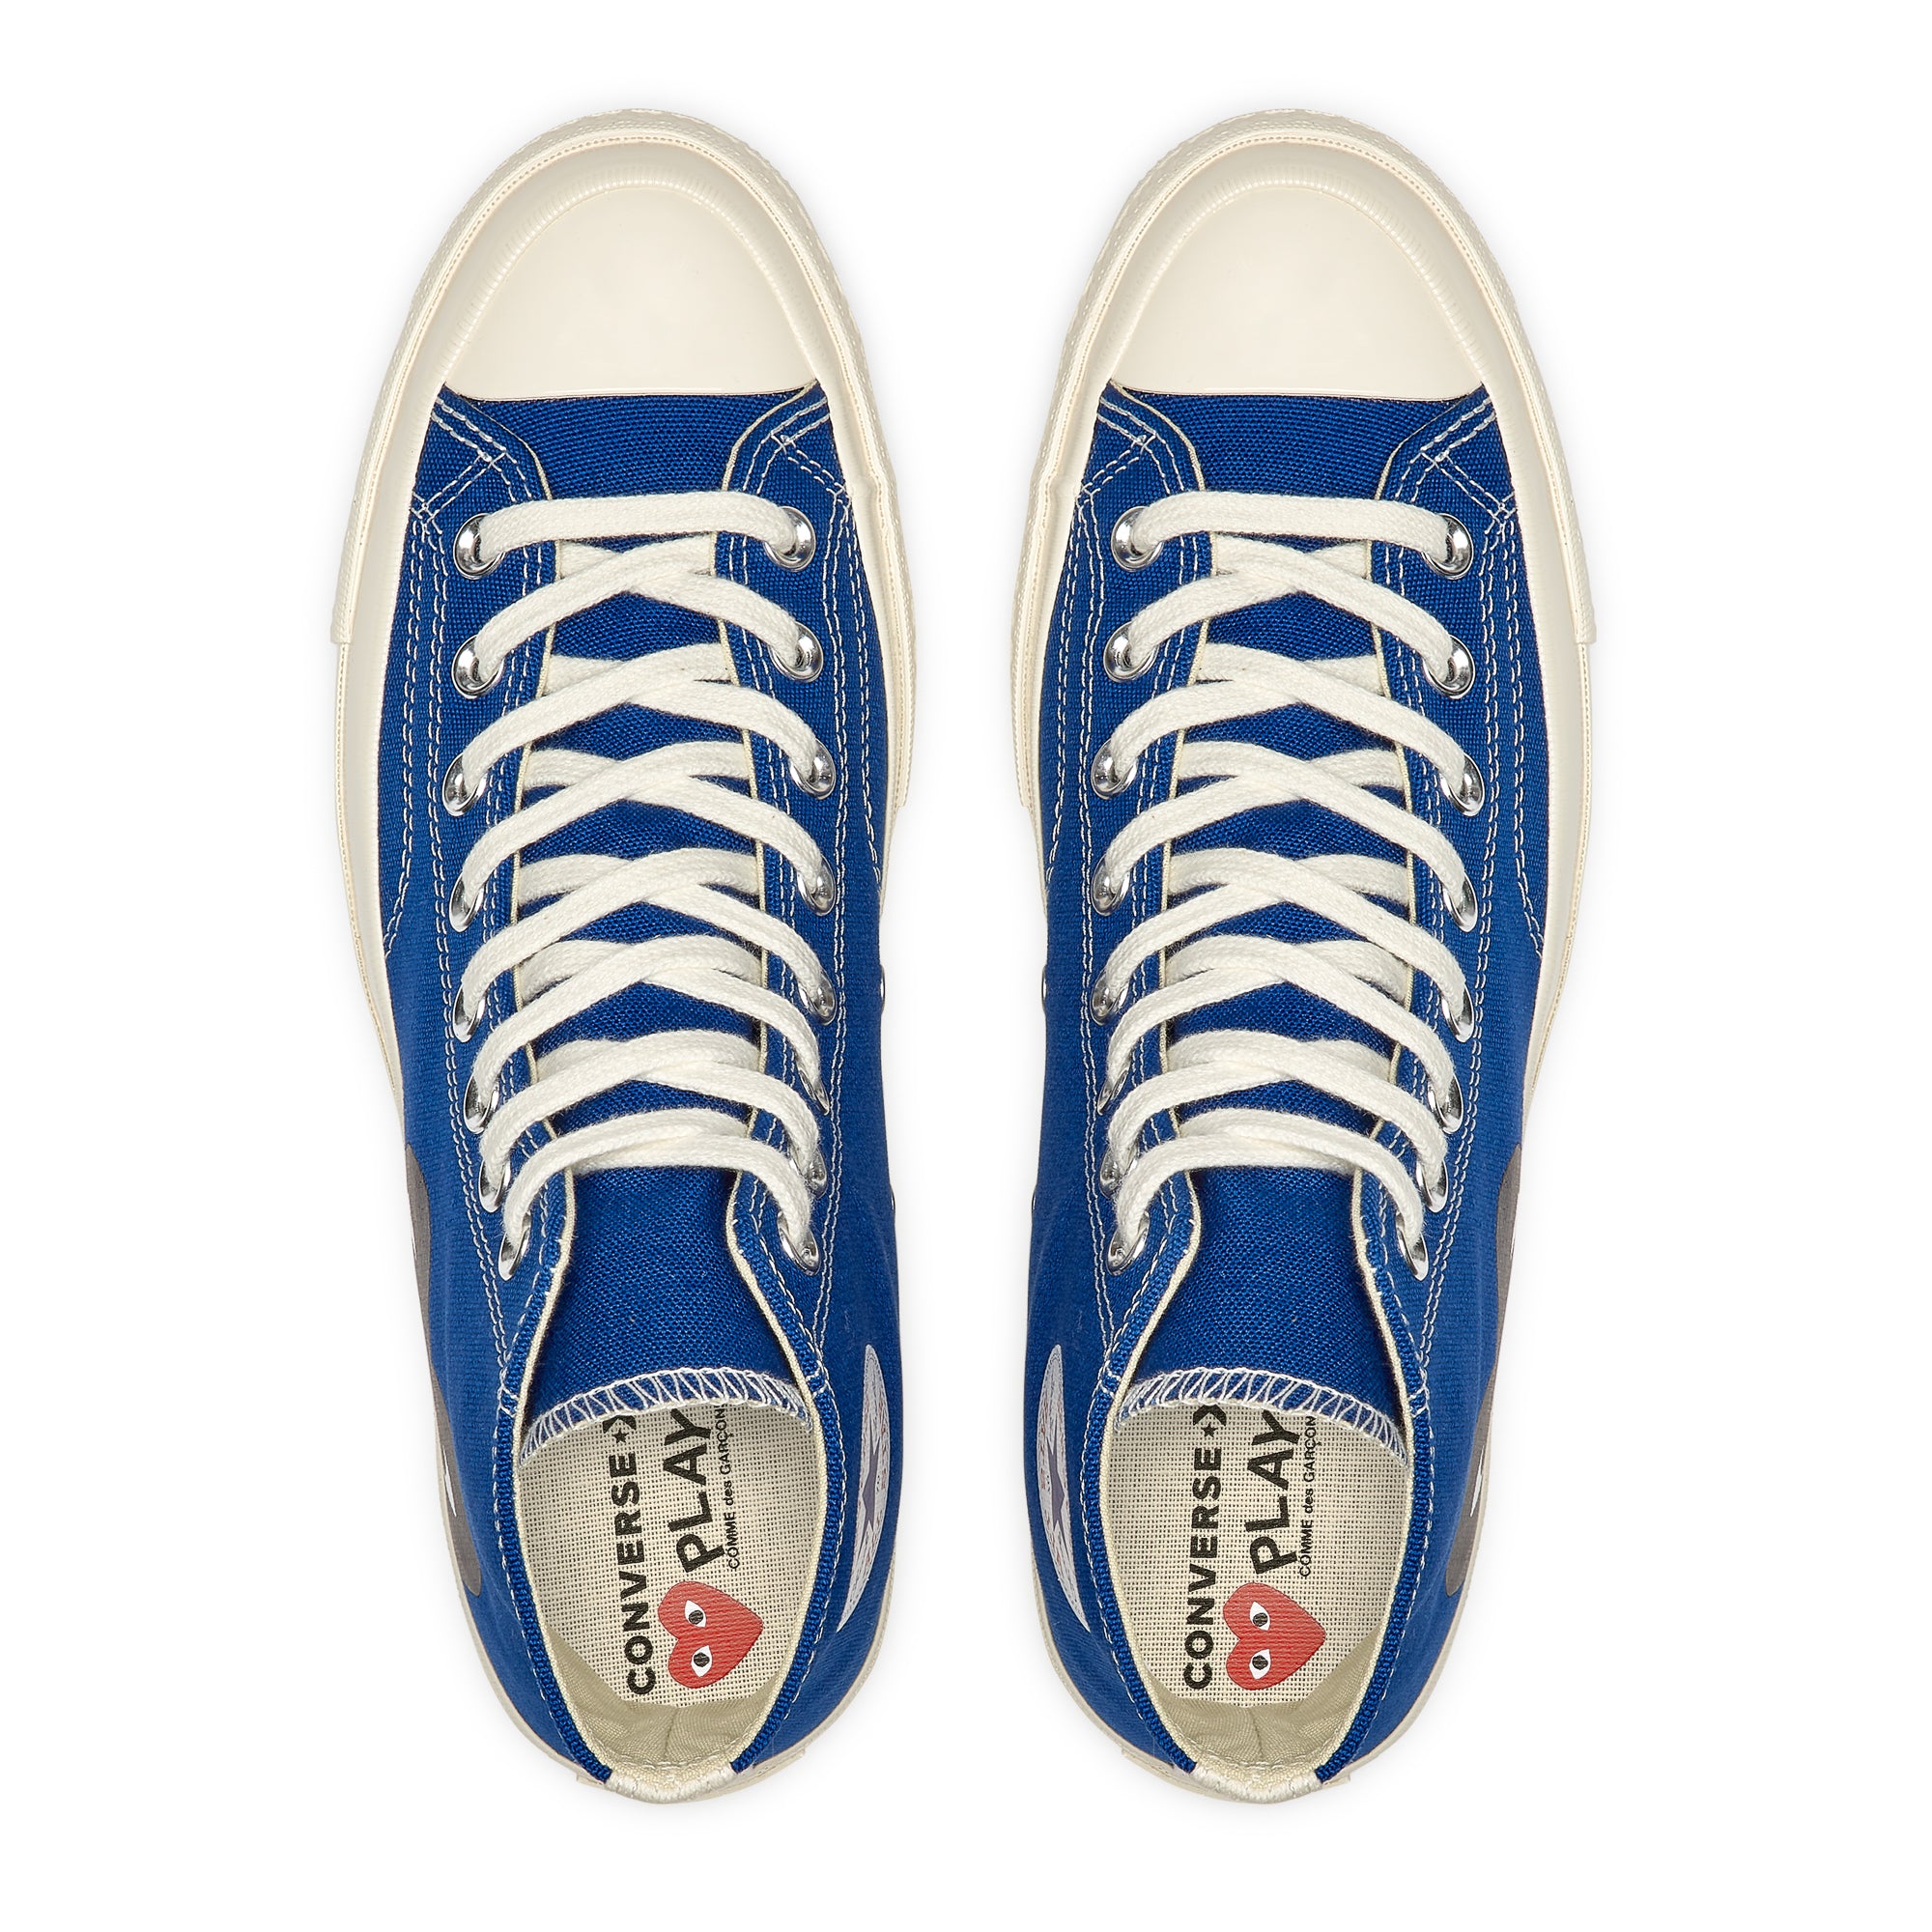 Play Converse - Black Heart Chuck Taylor All Star ’70 High Sneakers - (Blue) view 4